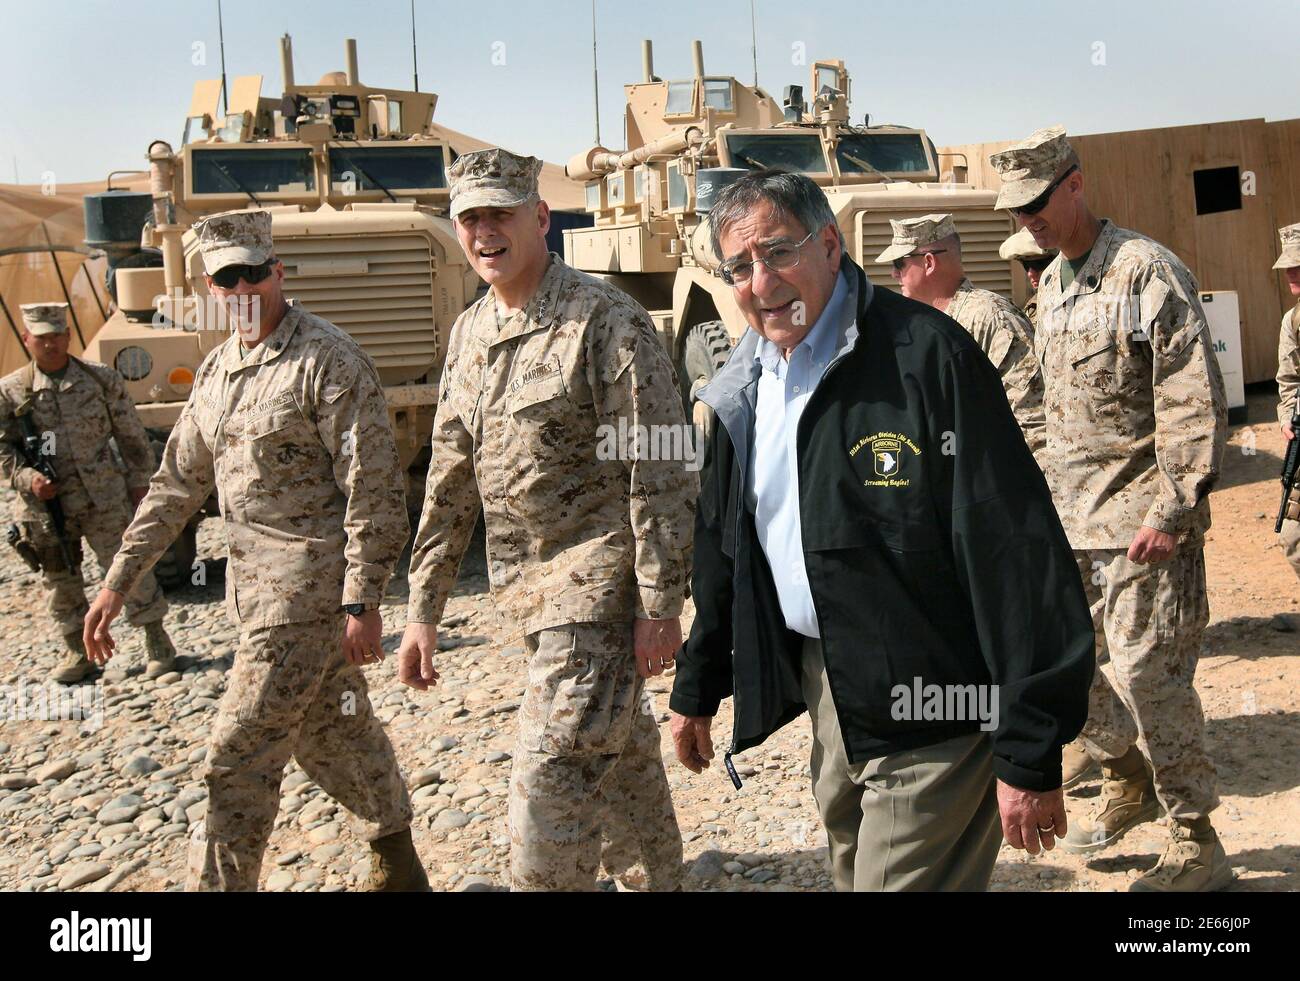 U.S. Defense Secretary Leon Panetta visits with troops at Forward Operating Base Shukvani, Afghanistan March 14, 2012. Panetta told troops in Afghanistan on Wednesday that the massacre of 16 Afghan civilians by an American soldier should not deter them from their mission to secure the country ahead of a 2014 NATO withdrawal deadline.  REUTERS/Scott Olson/Pool (AFGHANISTAN - Tags: POLITICS MILITARY) Stock Photo